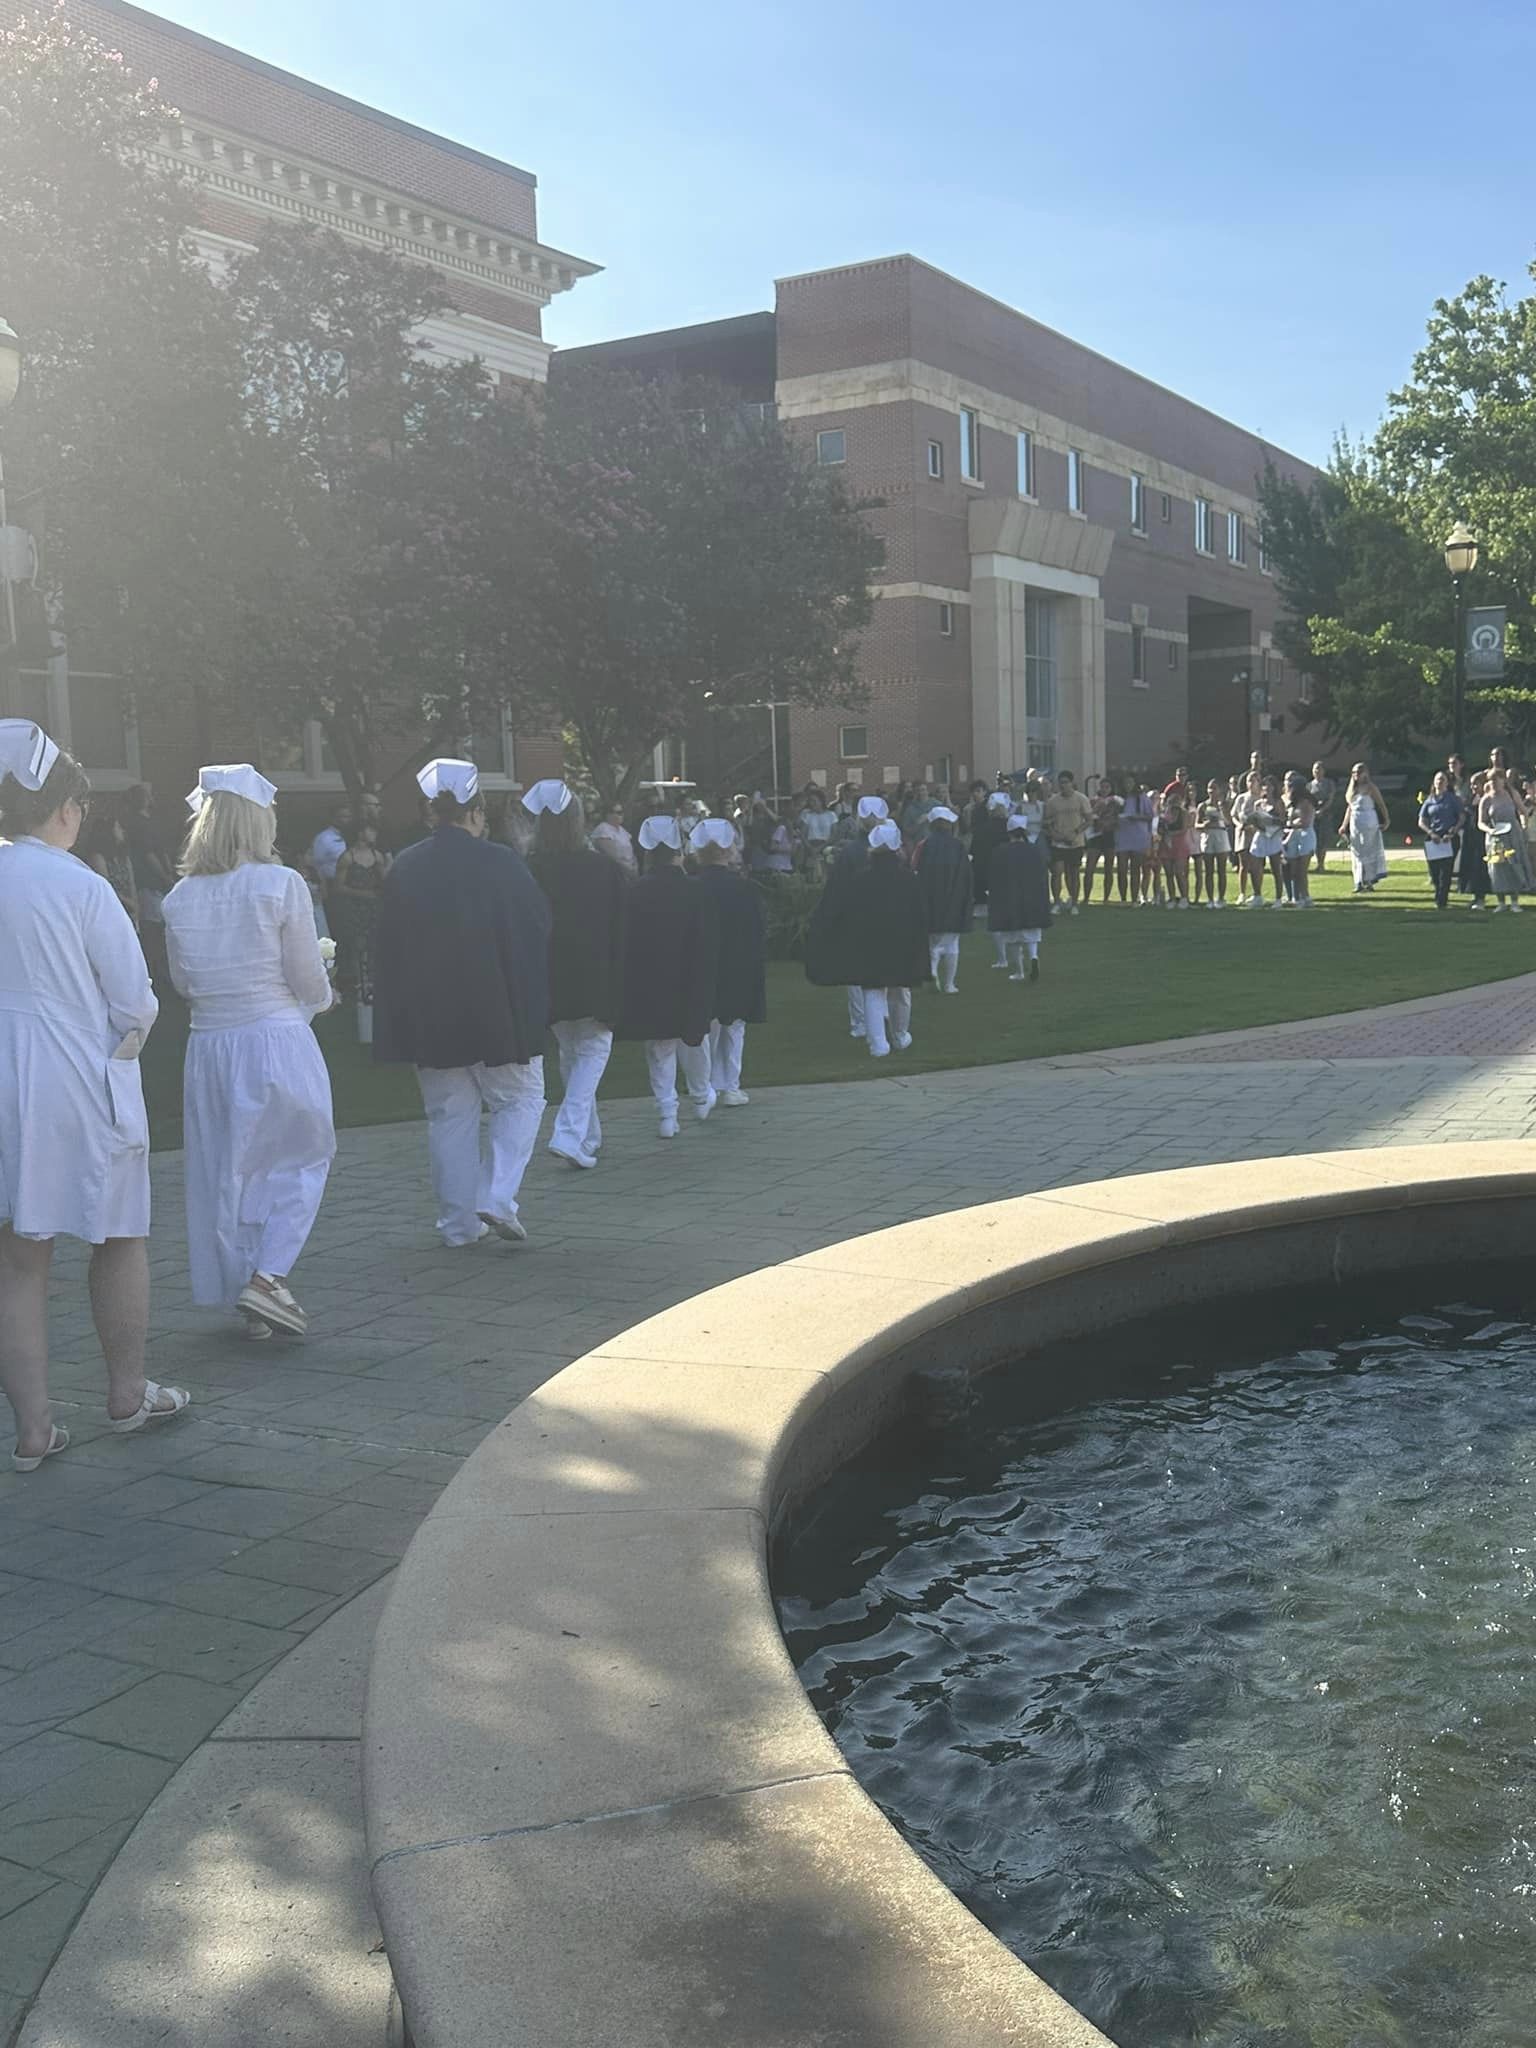 The Order of The White Rose Nurse Honor Guard attended the memorial service for GCSU nursing student Alexis Gunter, who passed away in June.